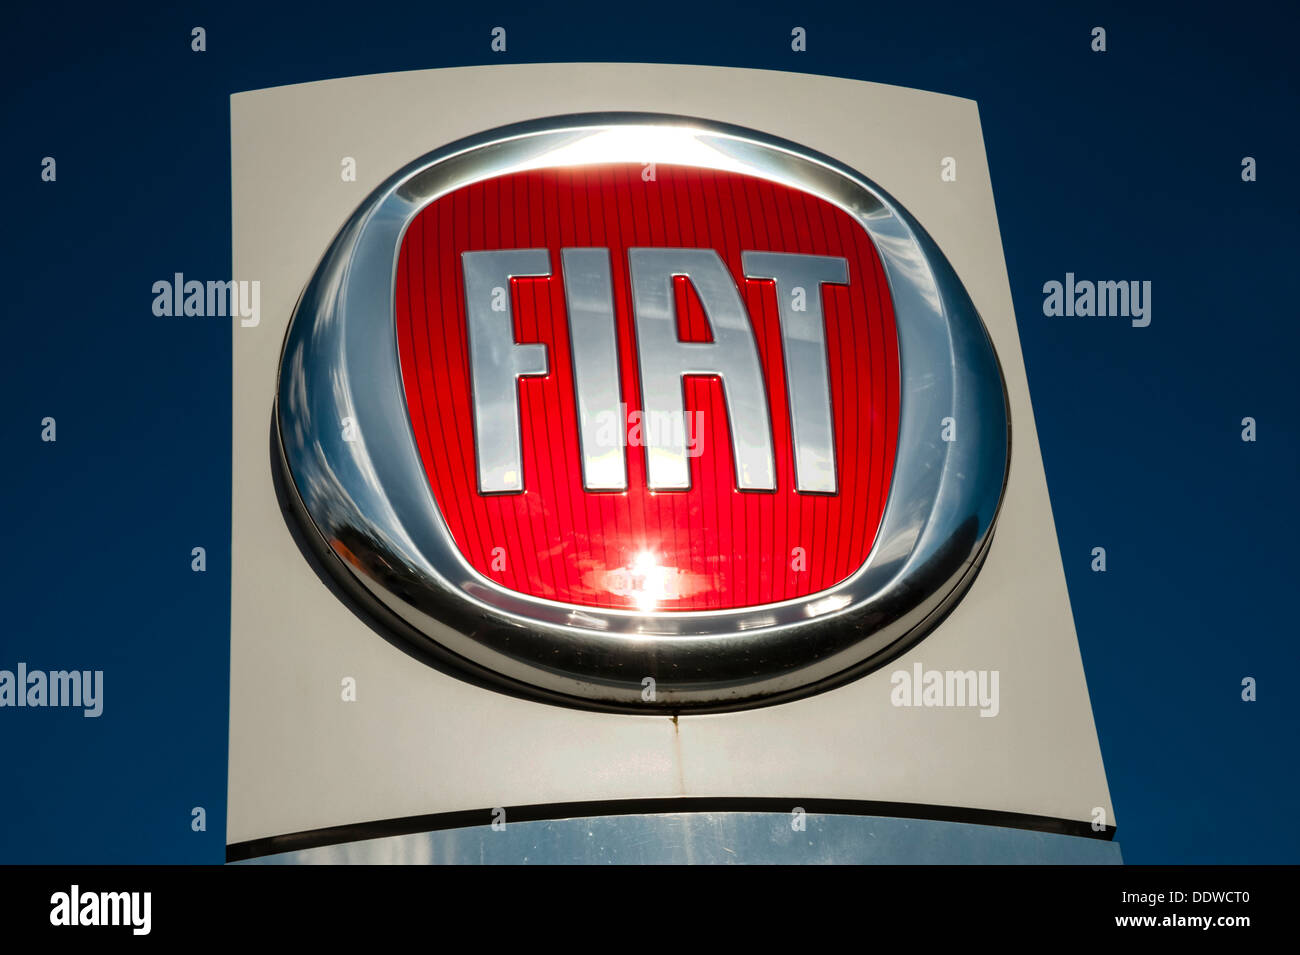 Fiat logo on a car dealership sign in the UK. Stock Photo